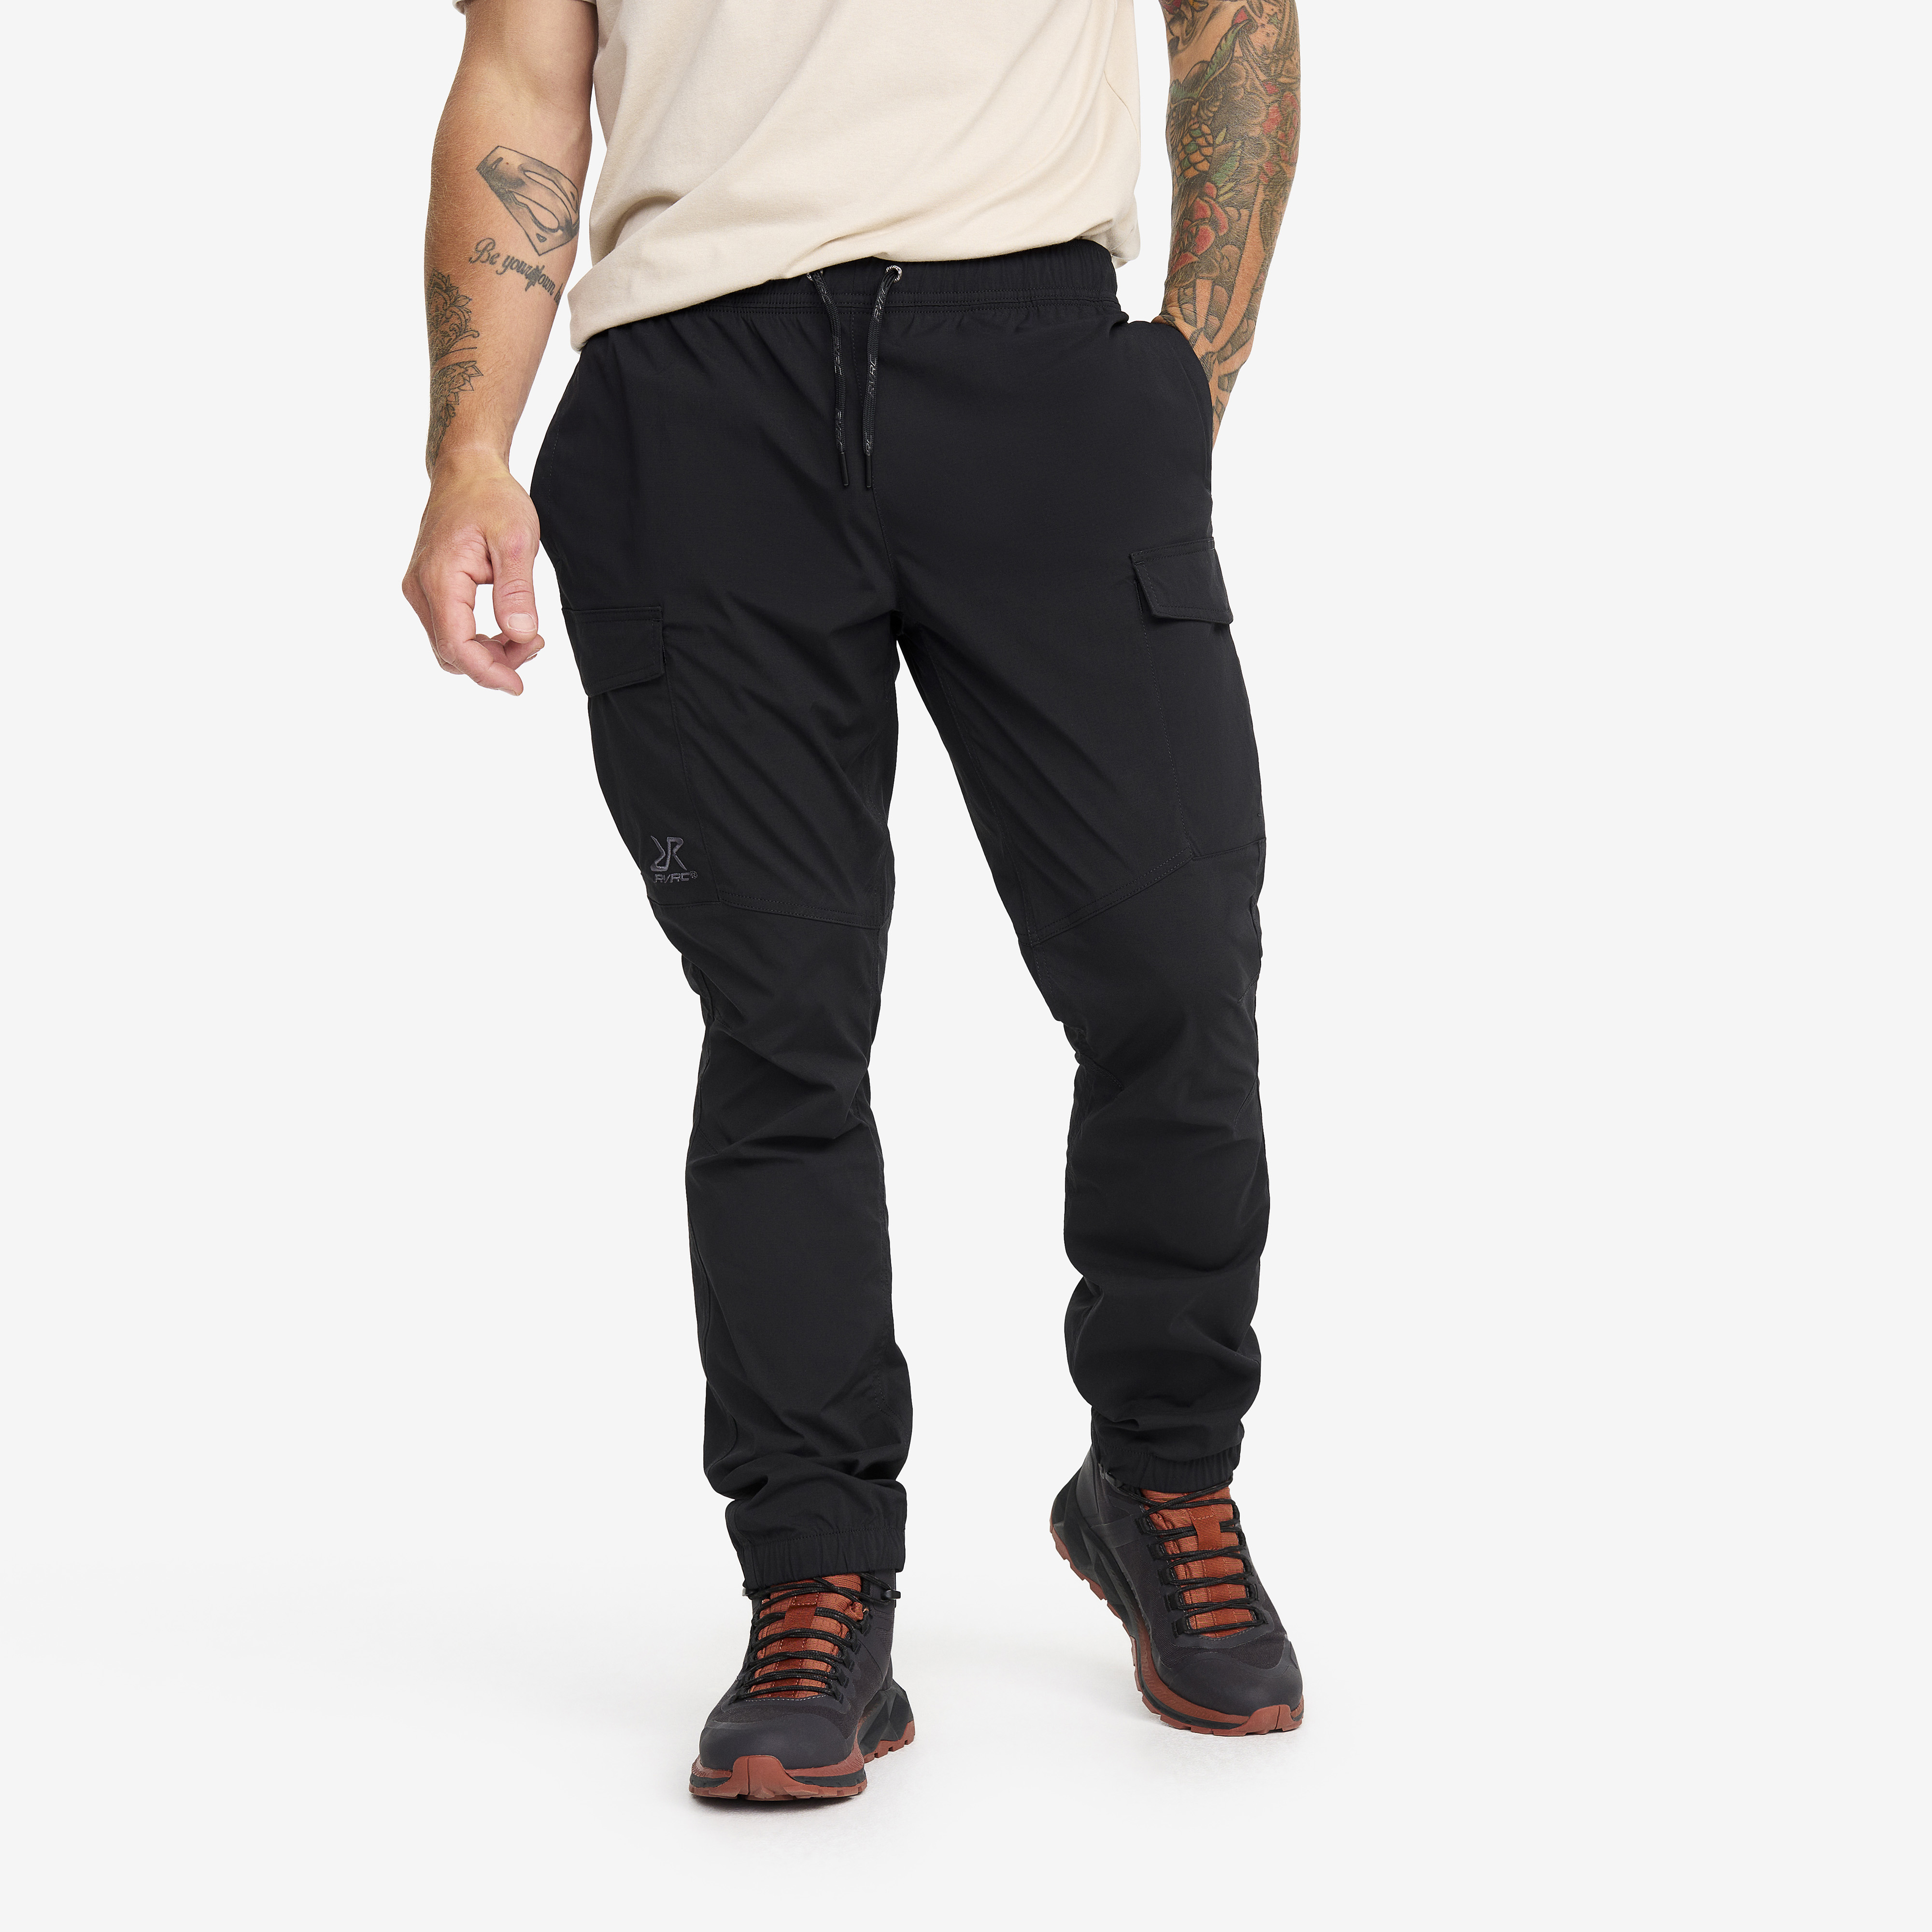 Buy Cool Black Cargo Pants Mens Online in India at Great Price